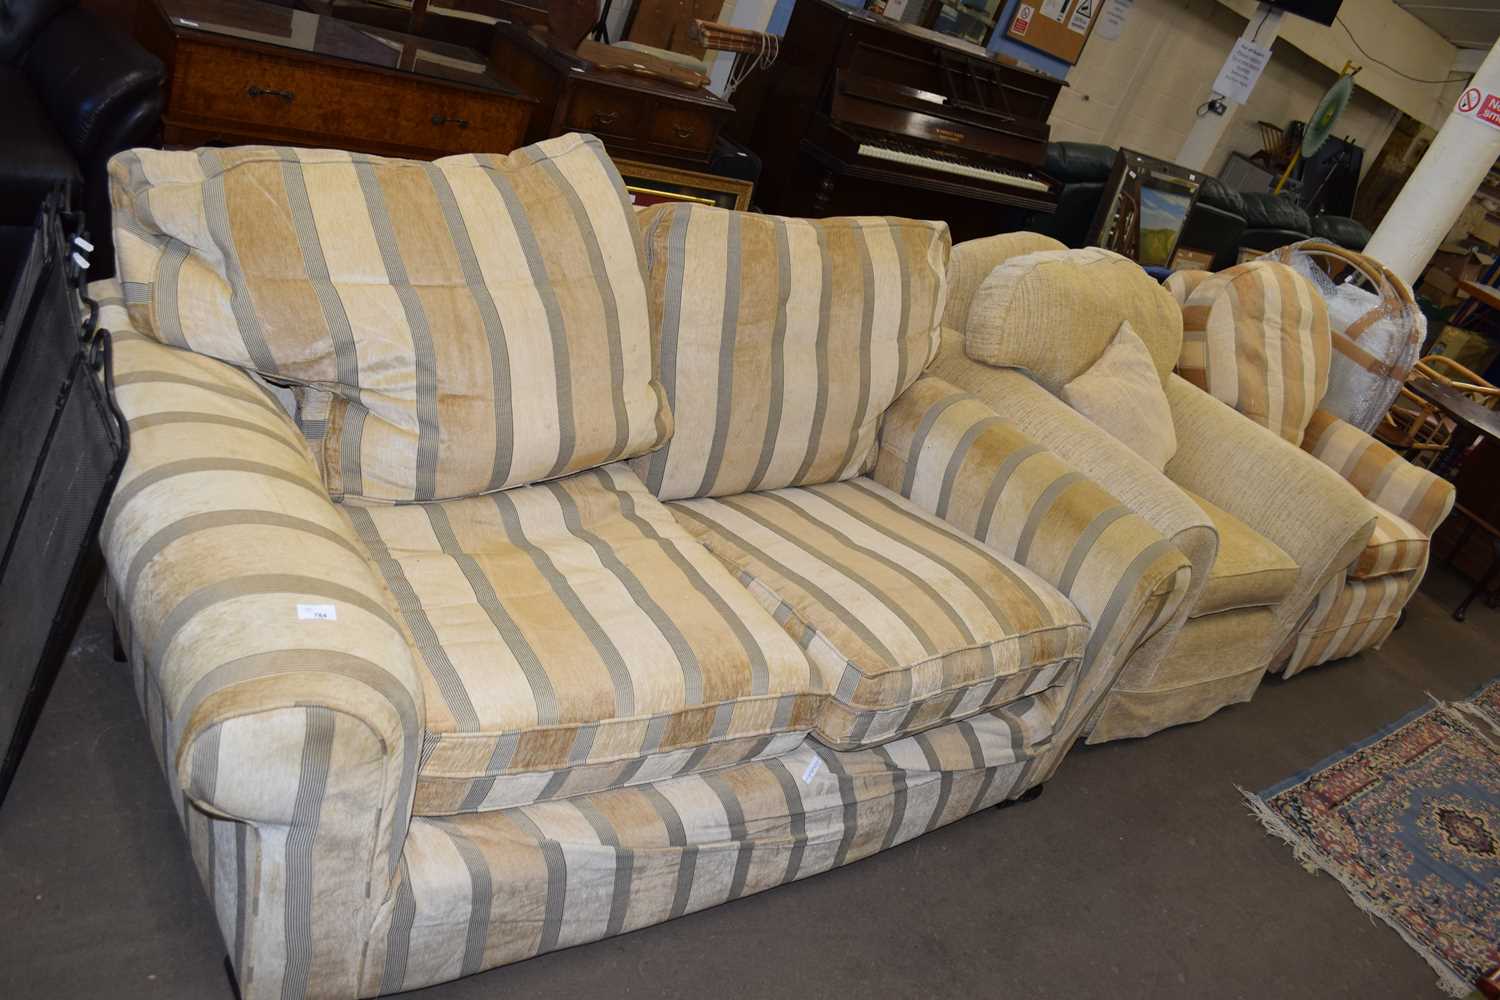 TWO-SEATER SOFA TOGETHER WITH A MATCHING ARMCHAIR AND A FURTHER PALE UPHOLSTERED ARMCHAIR (3)